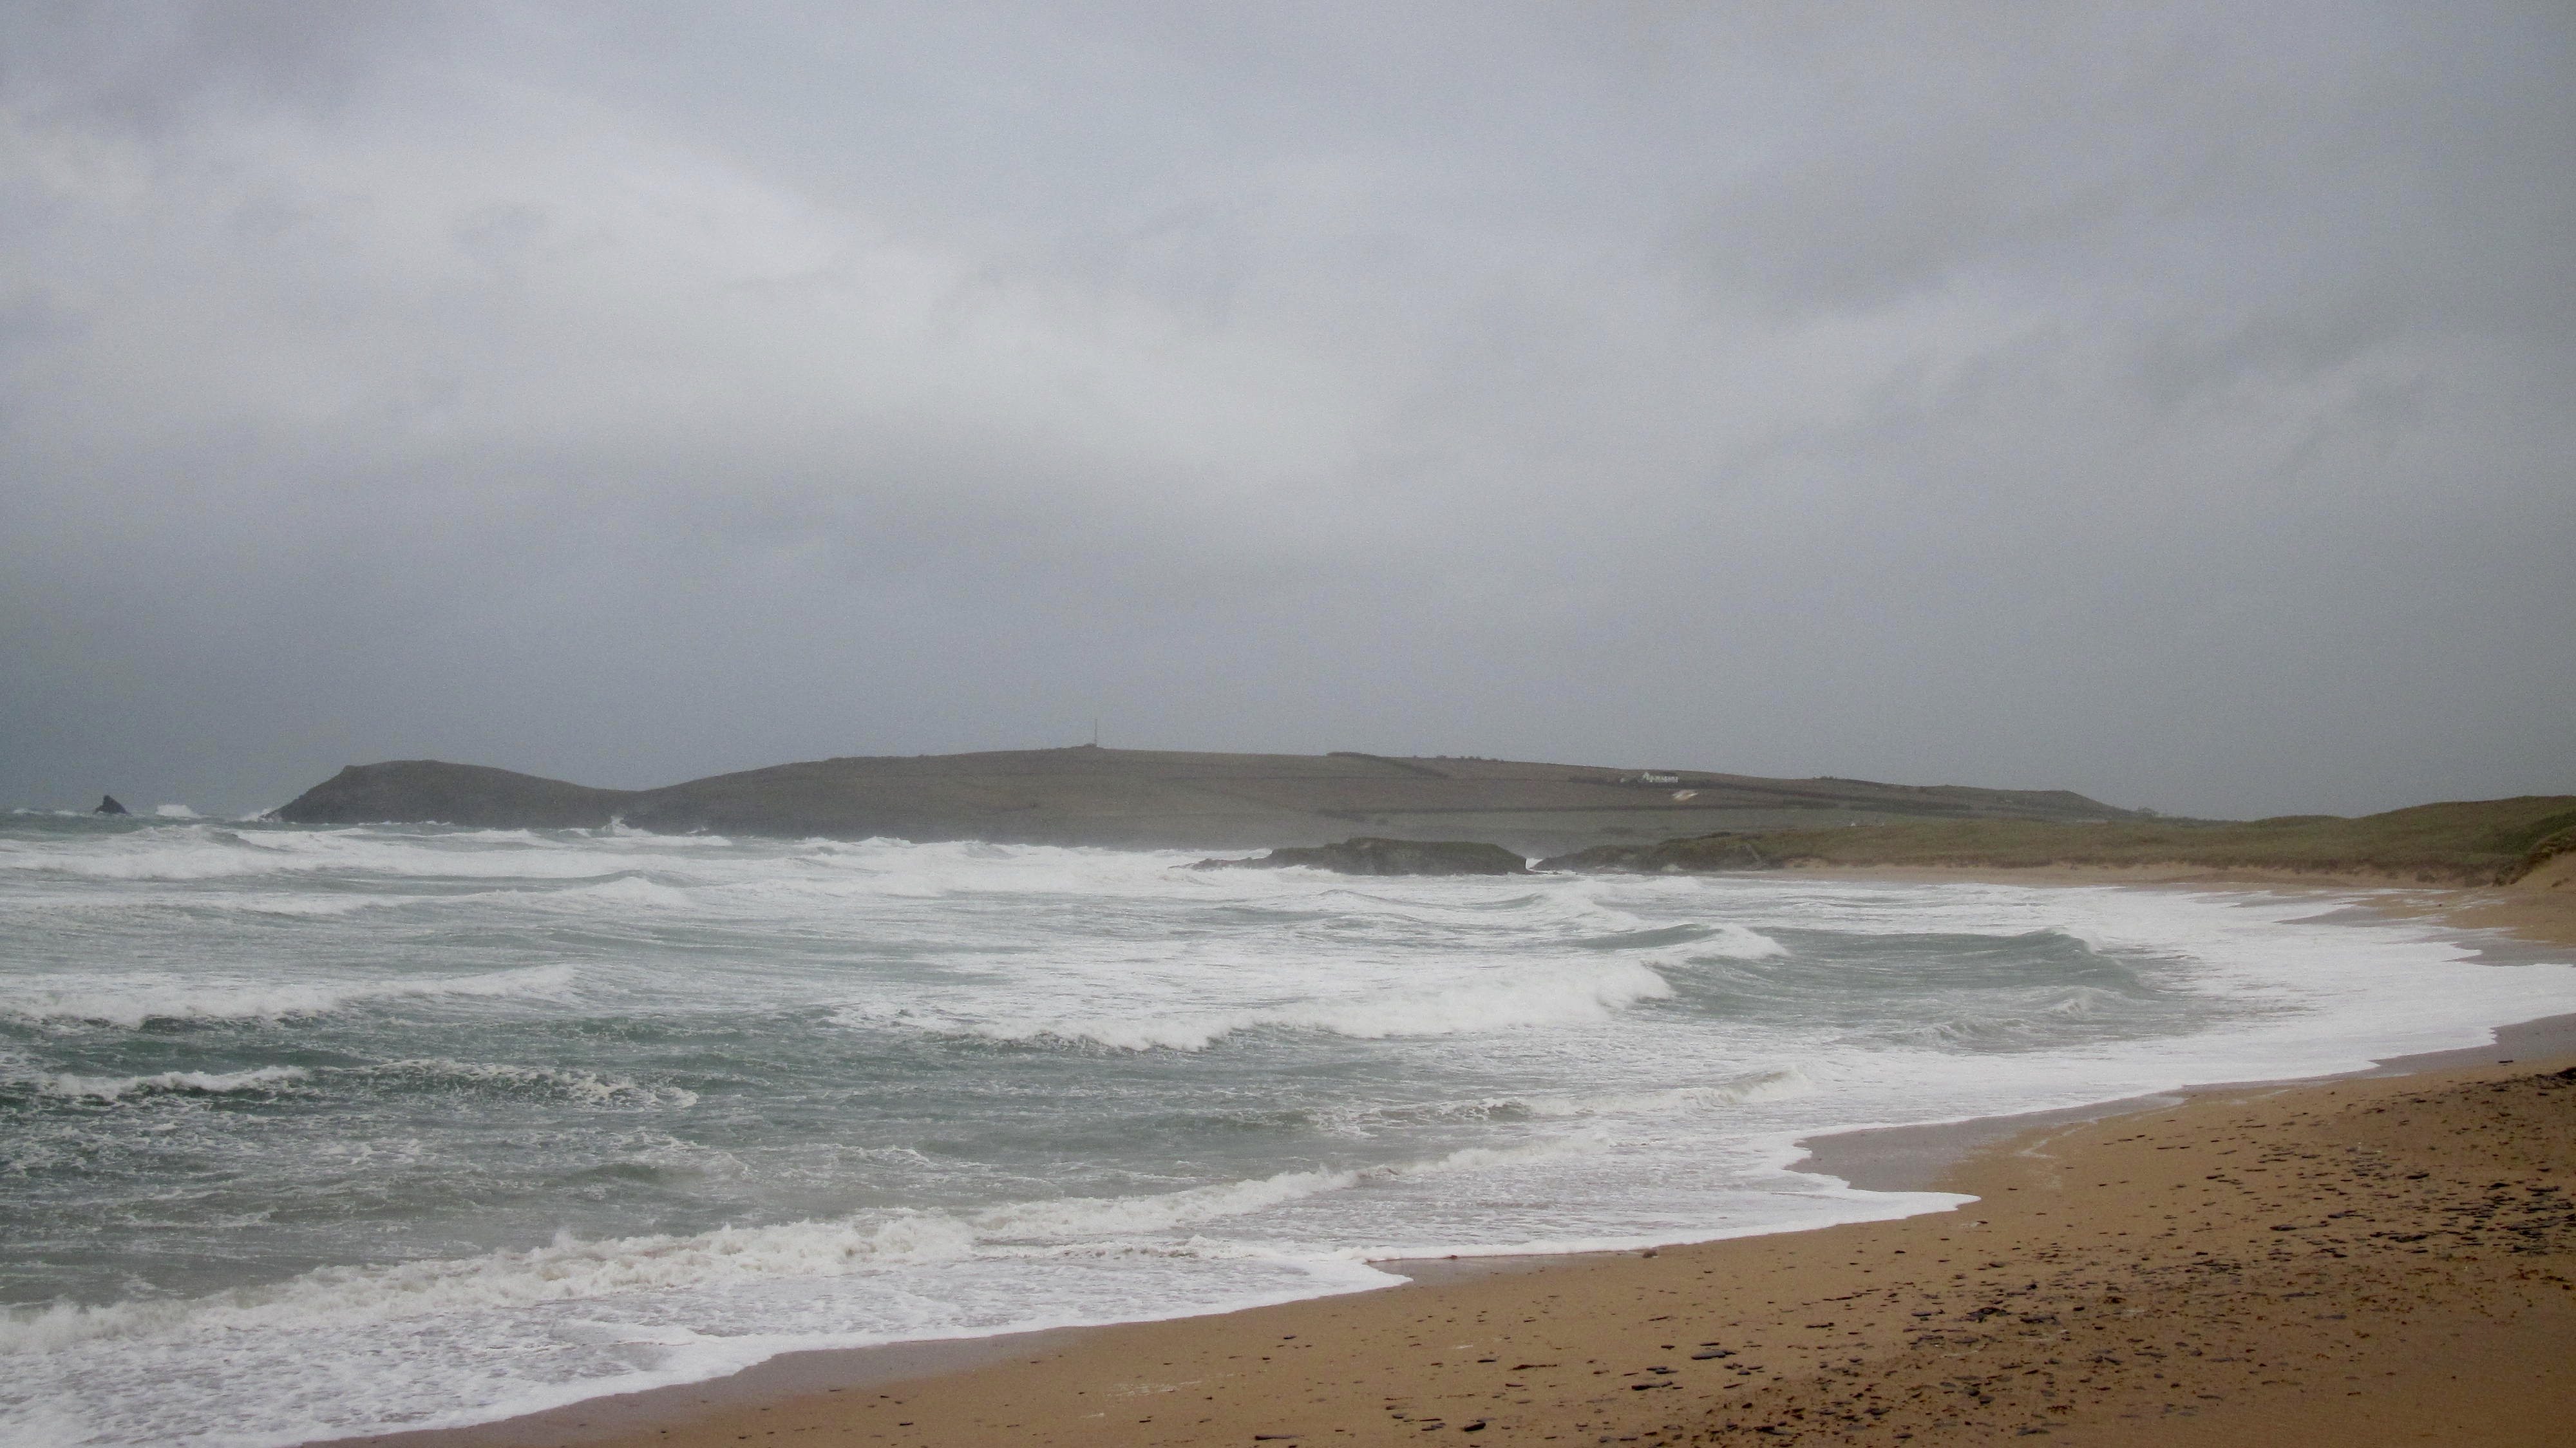 Surf Report for Monday 30th November 2015